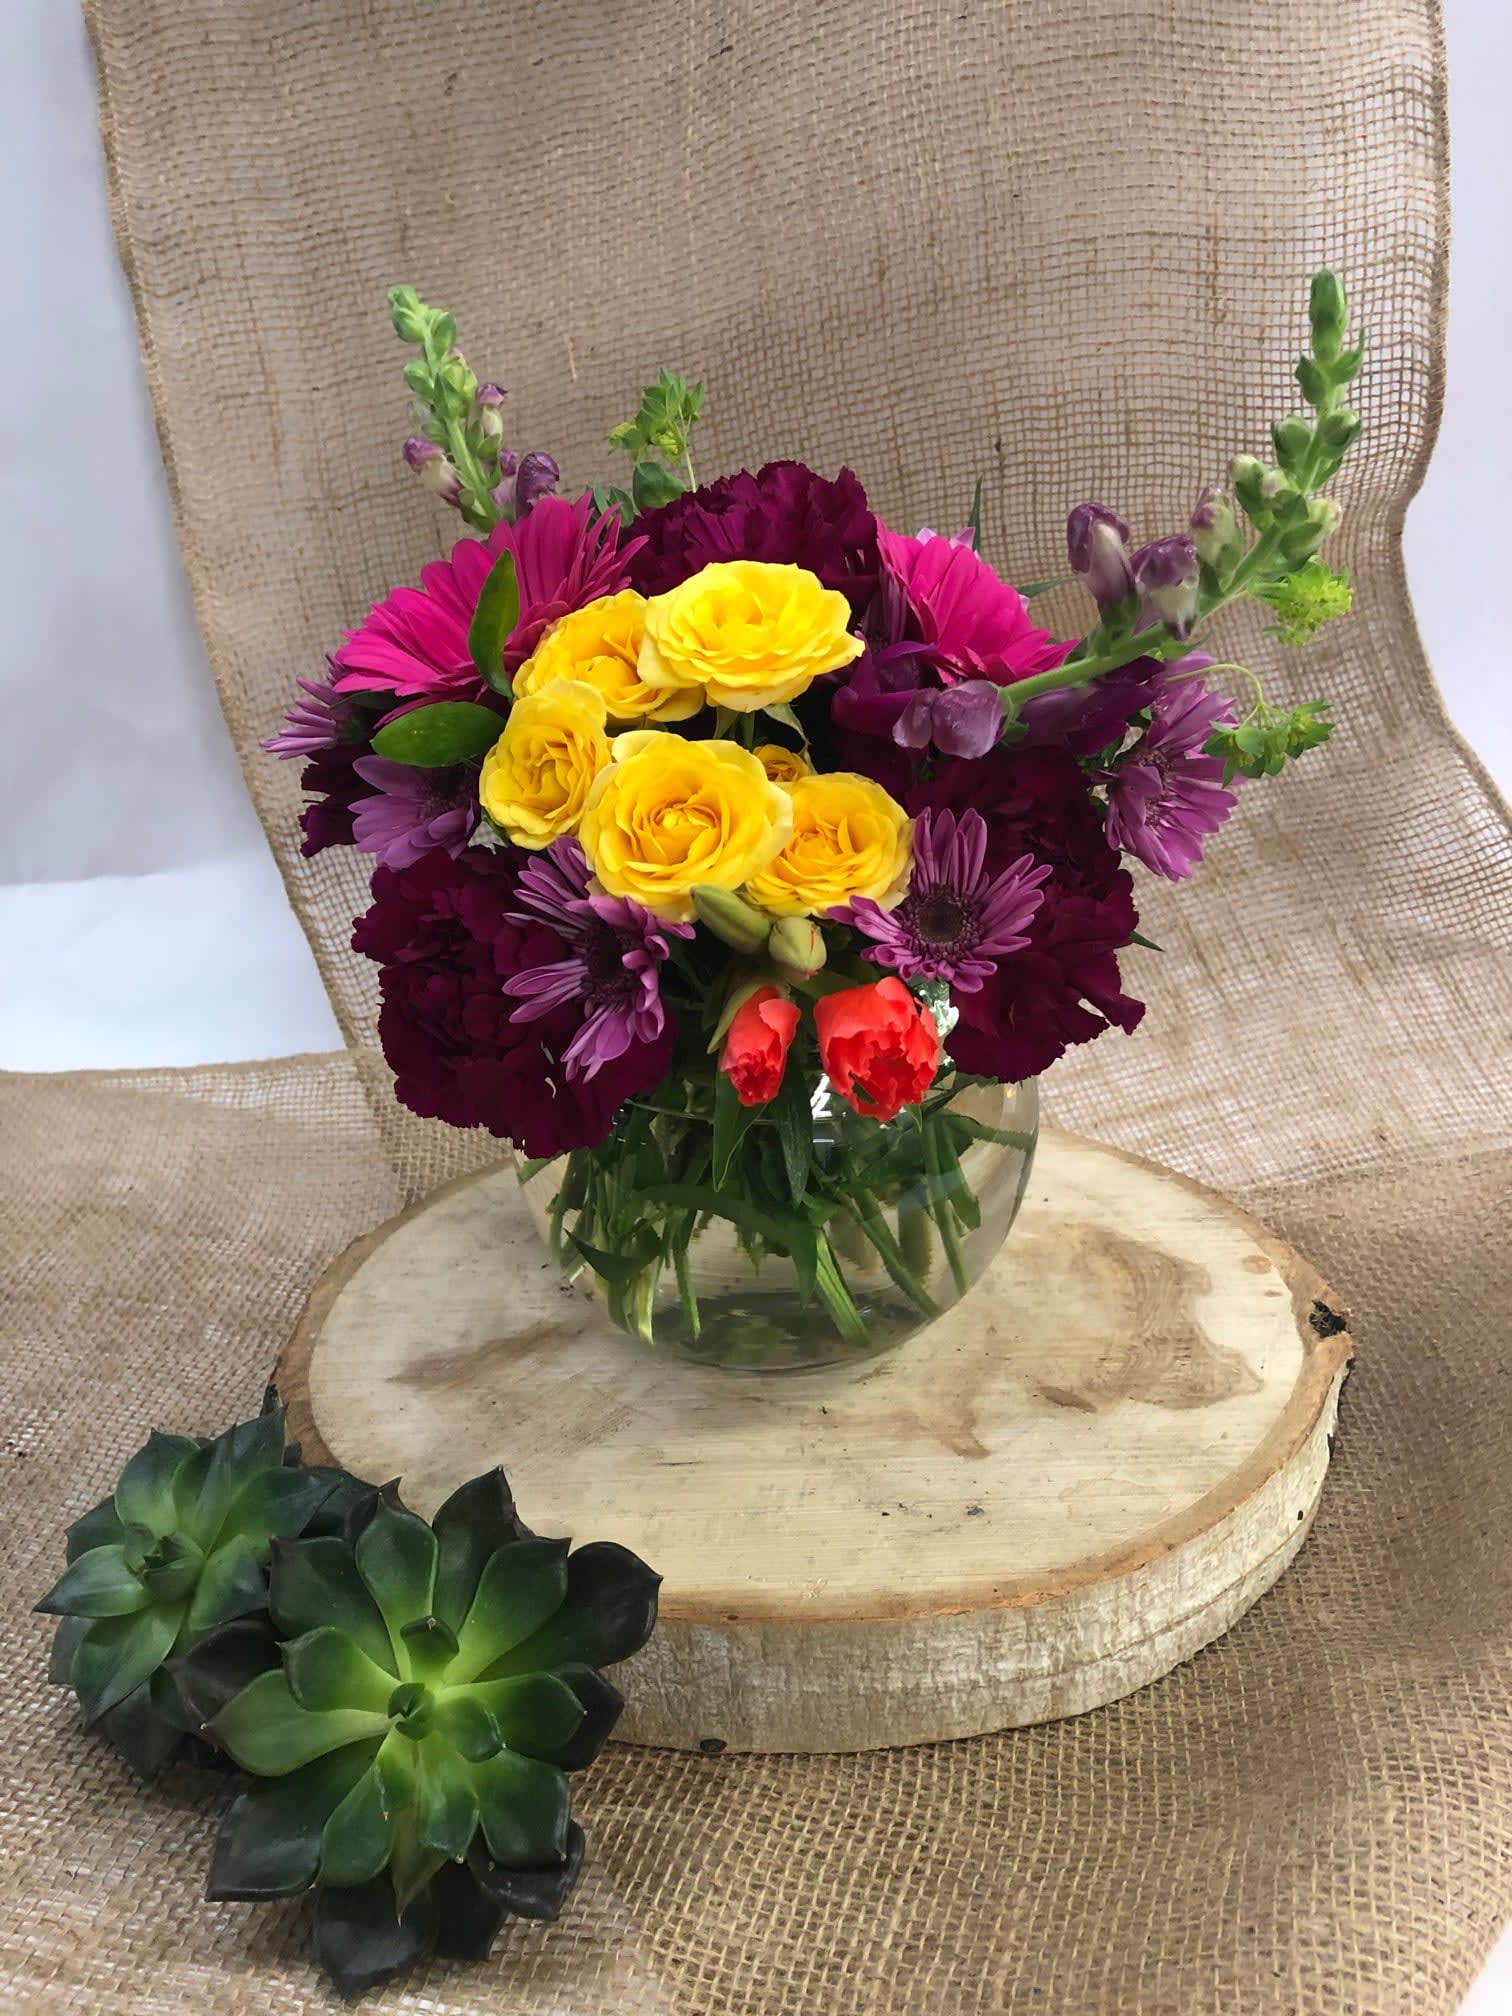 Bright Bubble Bowl - This cute compact arrangement has a beautiful selection of bright yellow Spray Roses, fuscia Gerber Daisys, deep burgundy Carnations, purple mums &amp; other rich colored flowers. This arrangement will be sure to brighten anyone's day! 